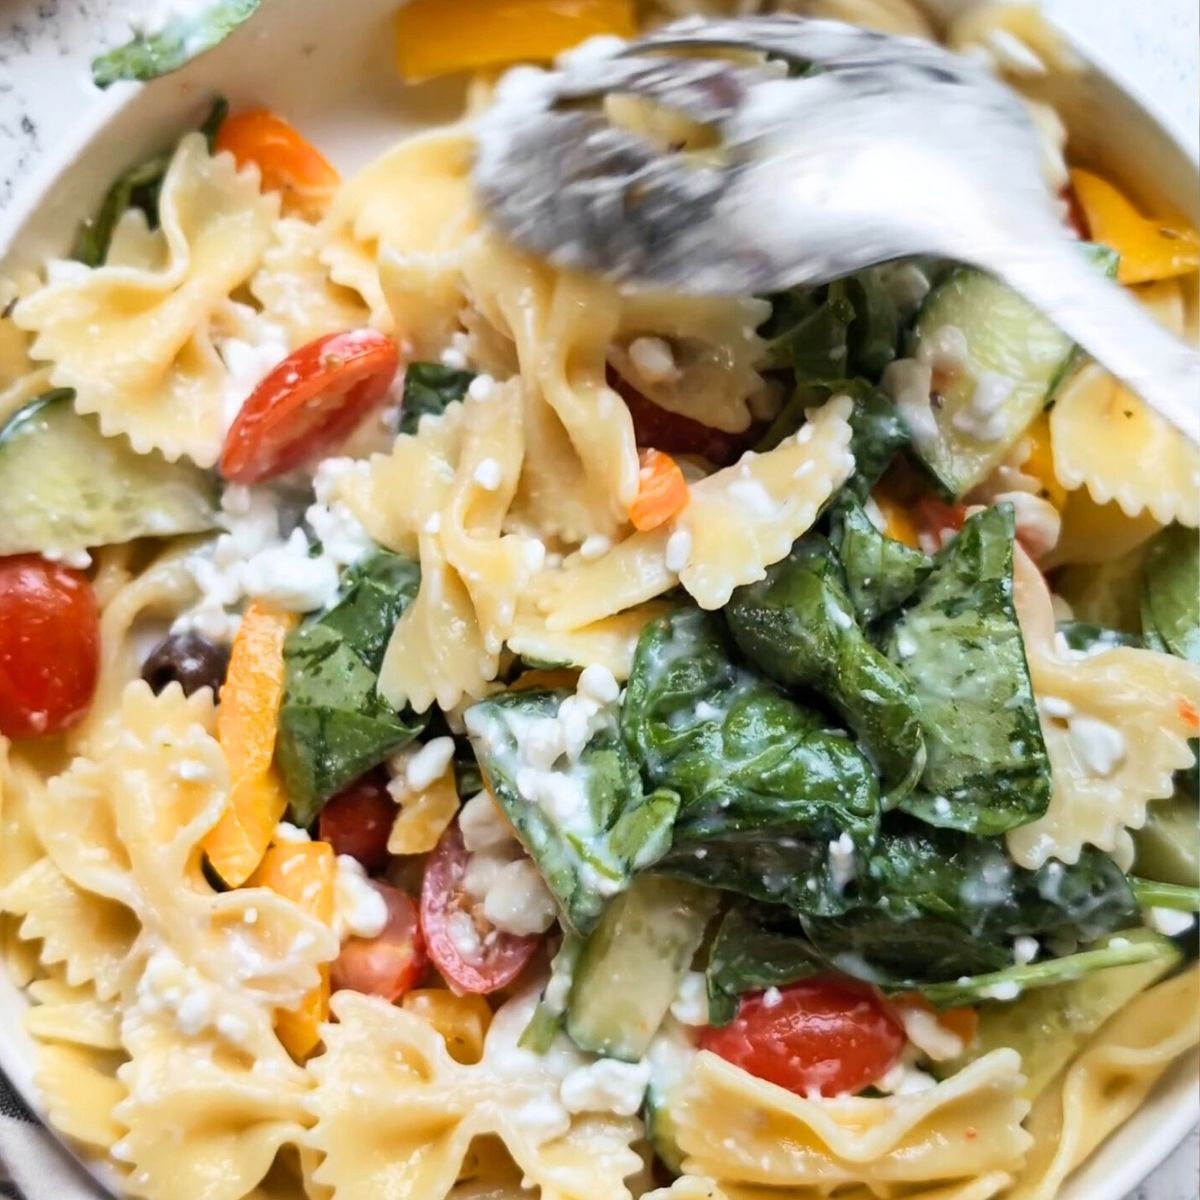 a metal spoon stirring cottage cheese into the pasta and veggie salad recipe.